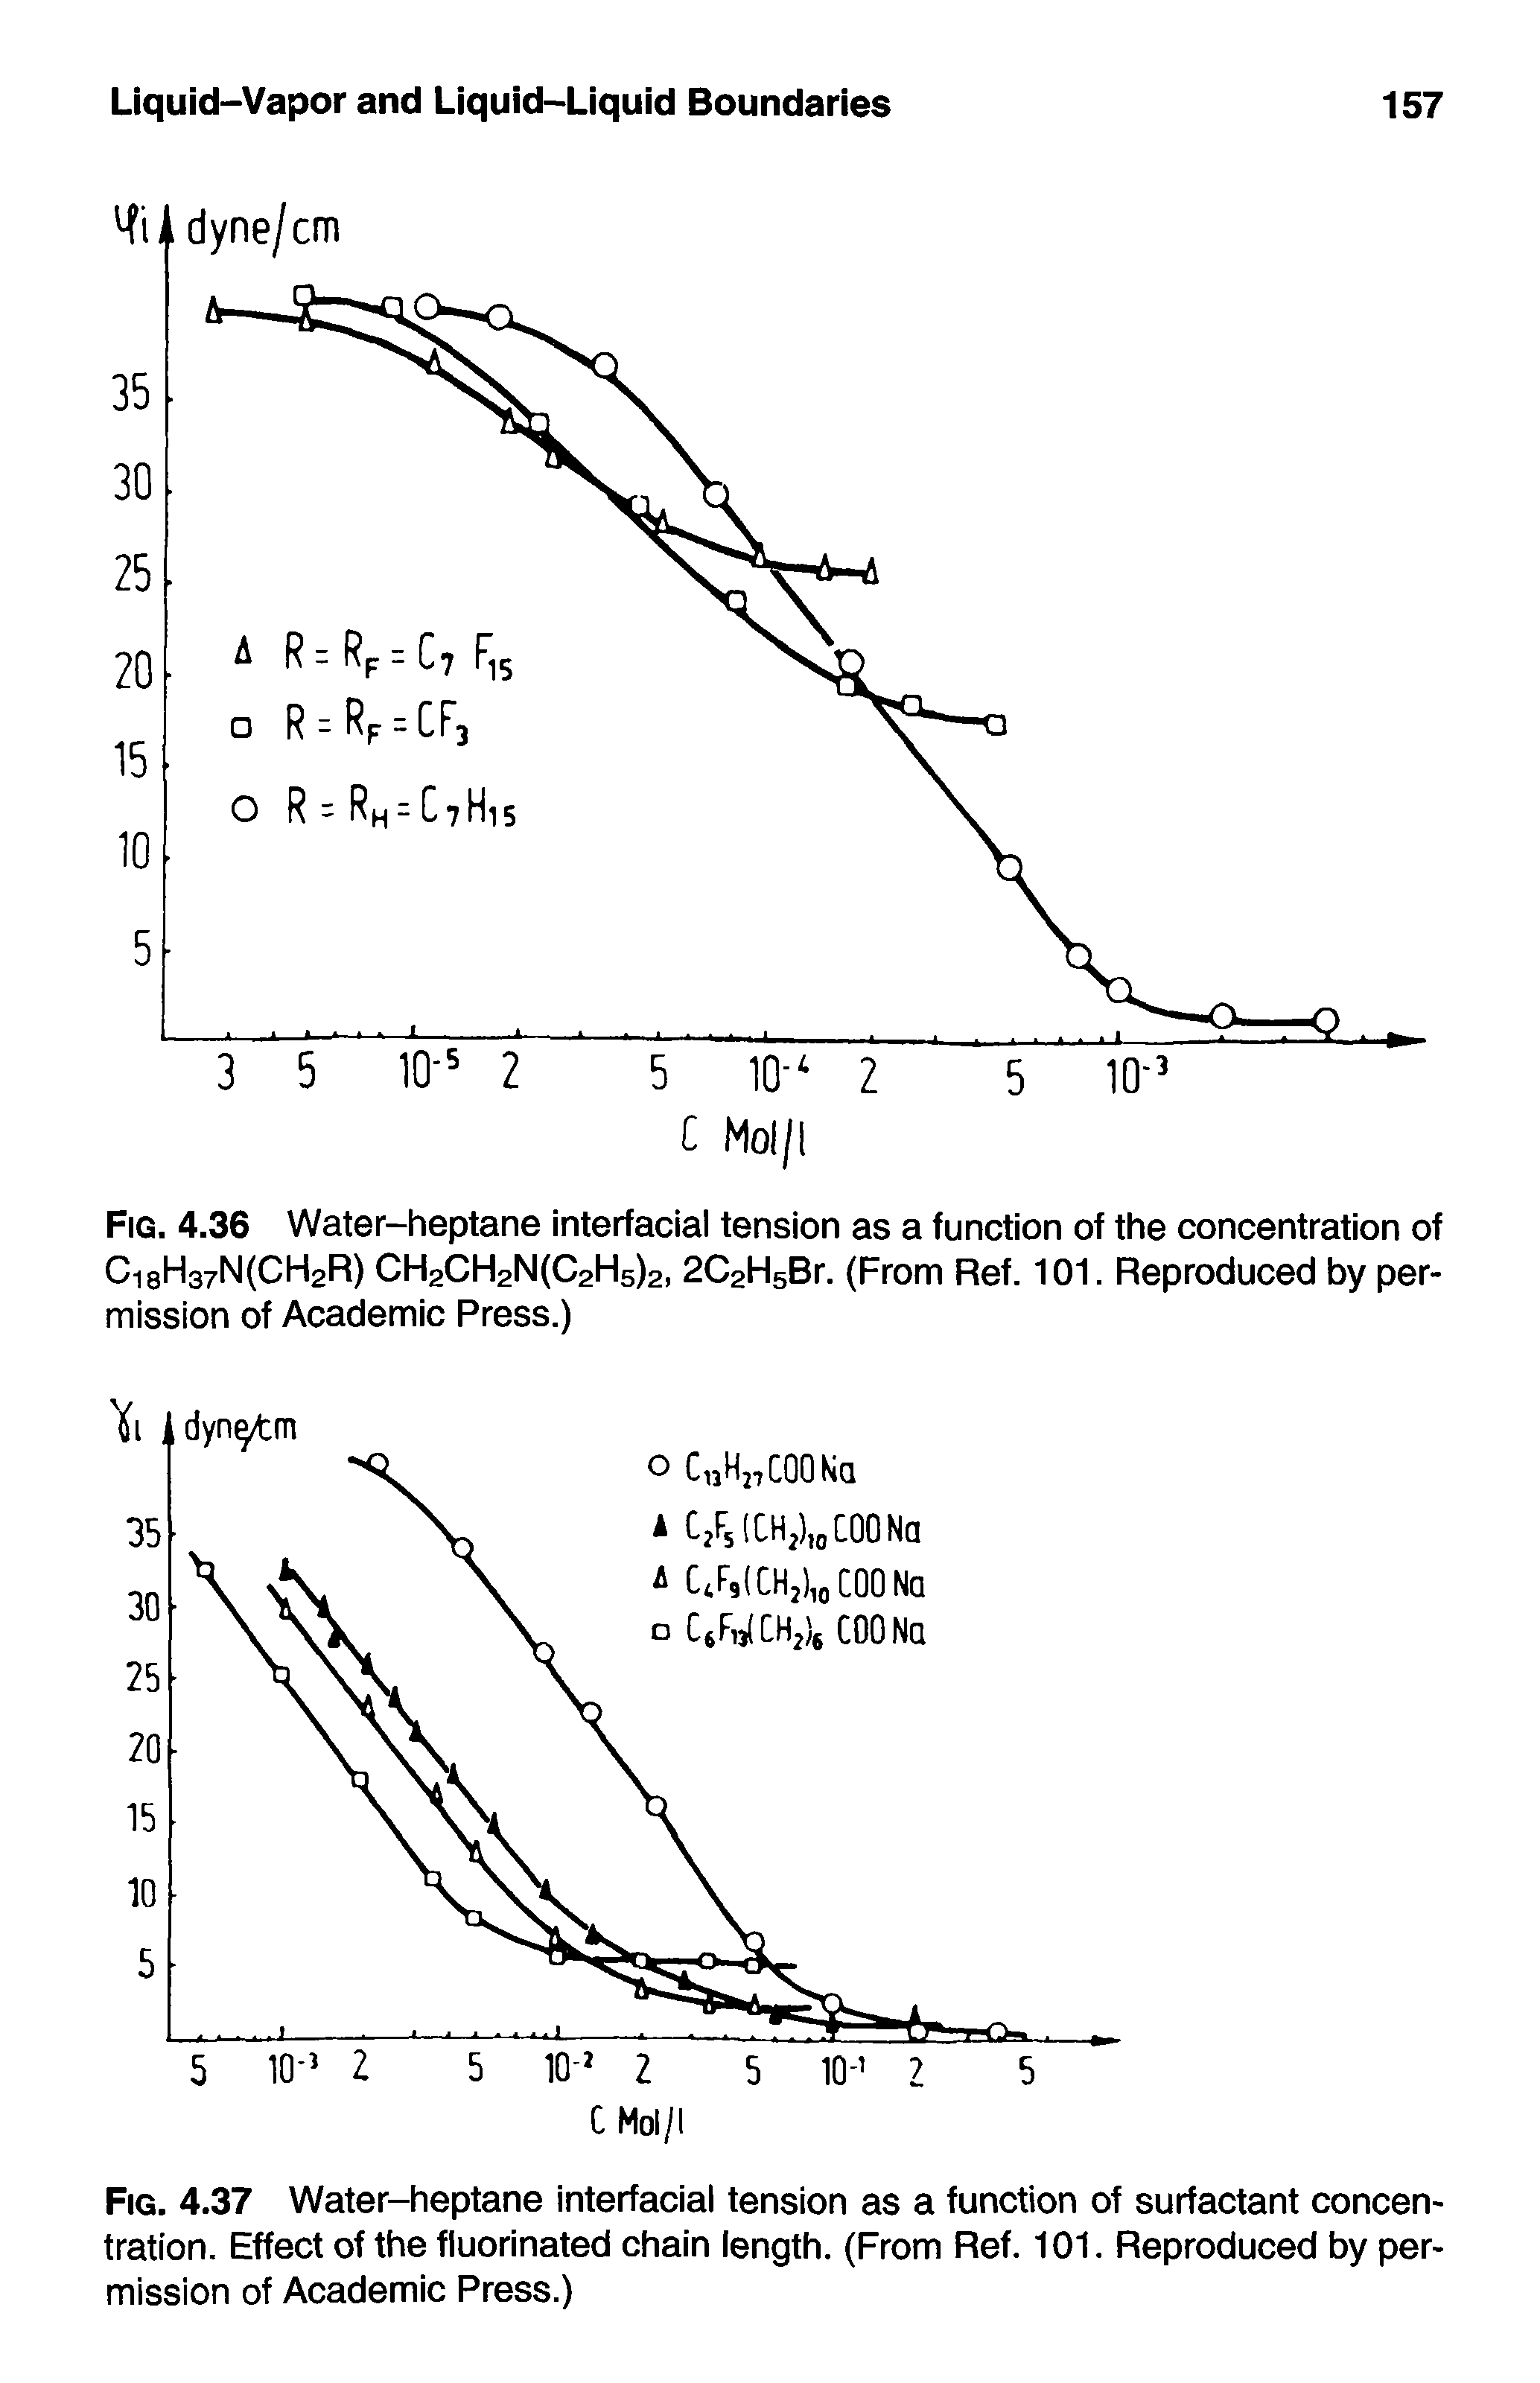 Fig. 4.37 Water-heptane interfacial tension as a function of surfactant concentration. Effect of the fluorinated chain length. (From Ref. 101. Reproduced by permission of Academic Press.)...